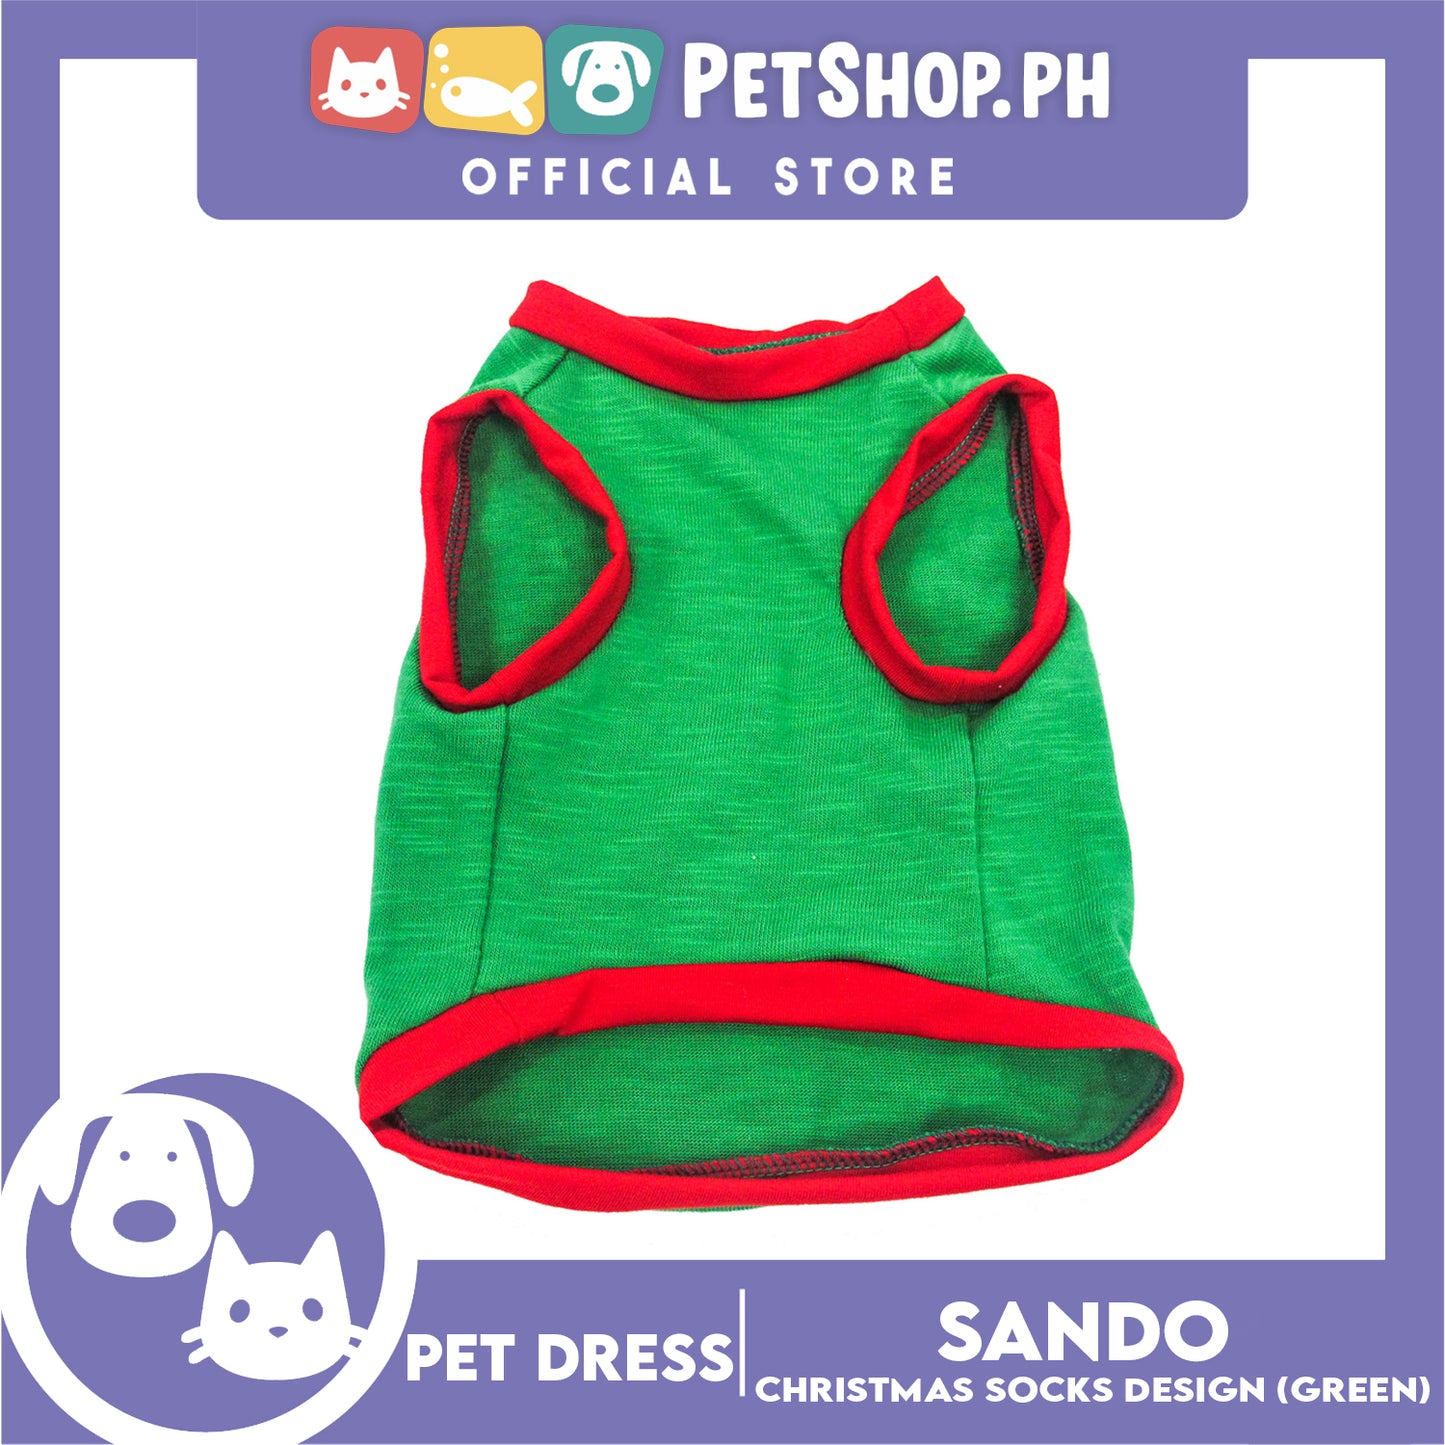 Pet Shirt (Small) Christmas Stocking with Red Piping Sleeveless for Puppy, Small Dog and Cats- Sando Breathable Clothes,Pet T-shirt, Sweat Shirt